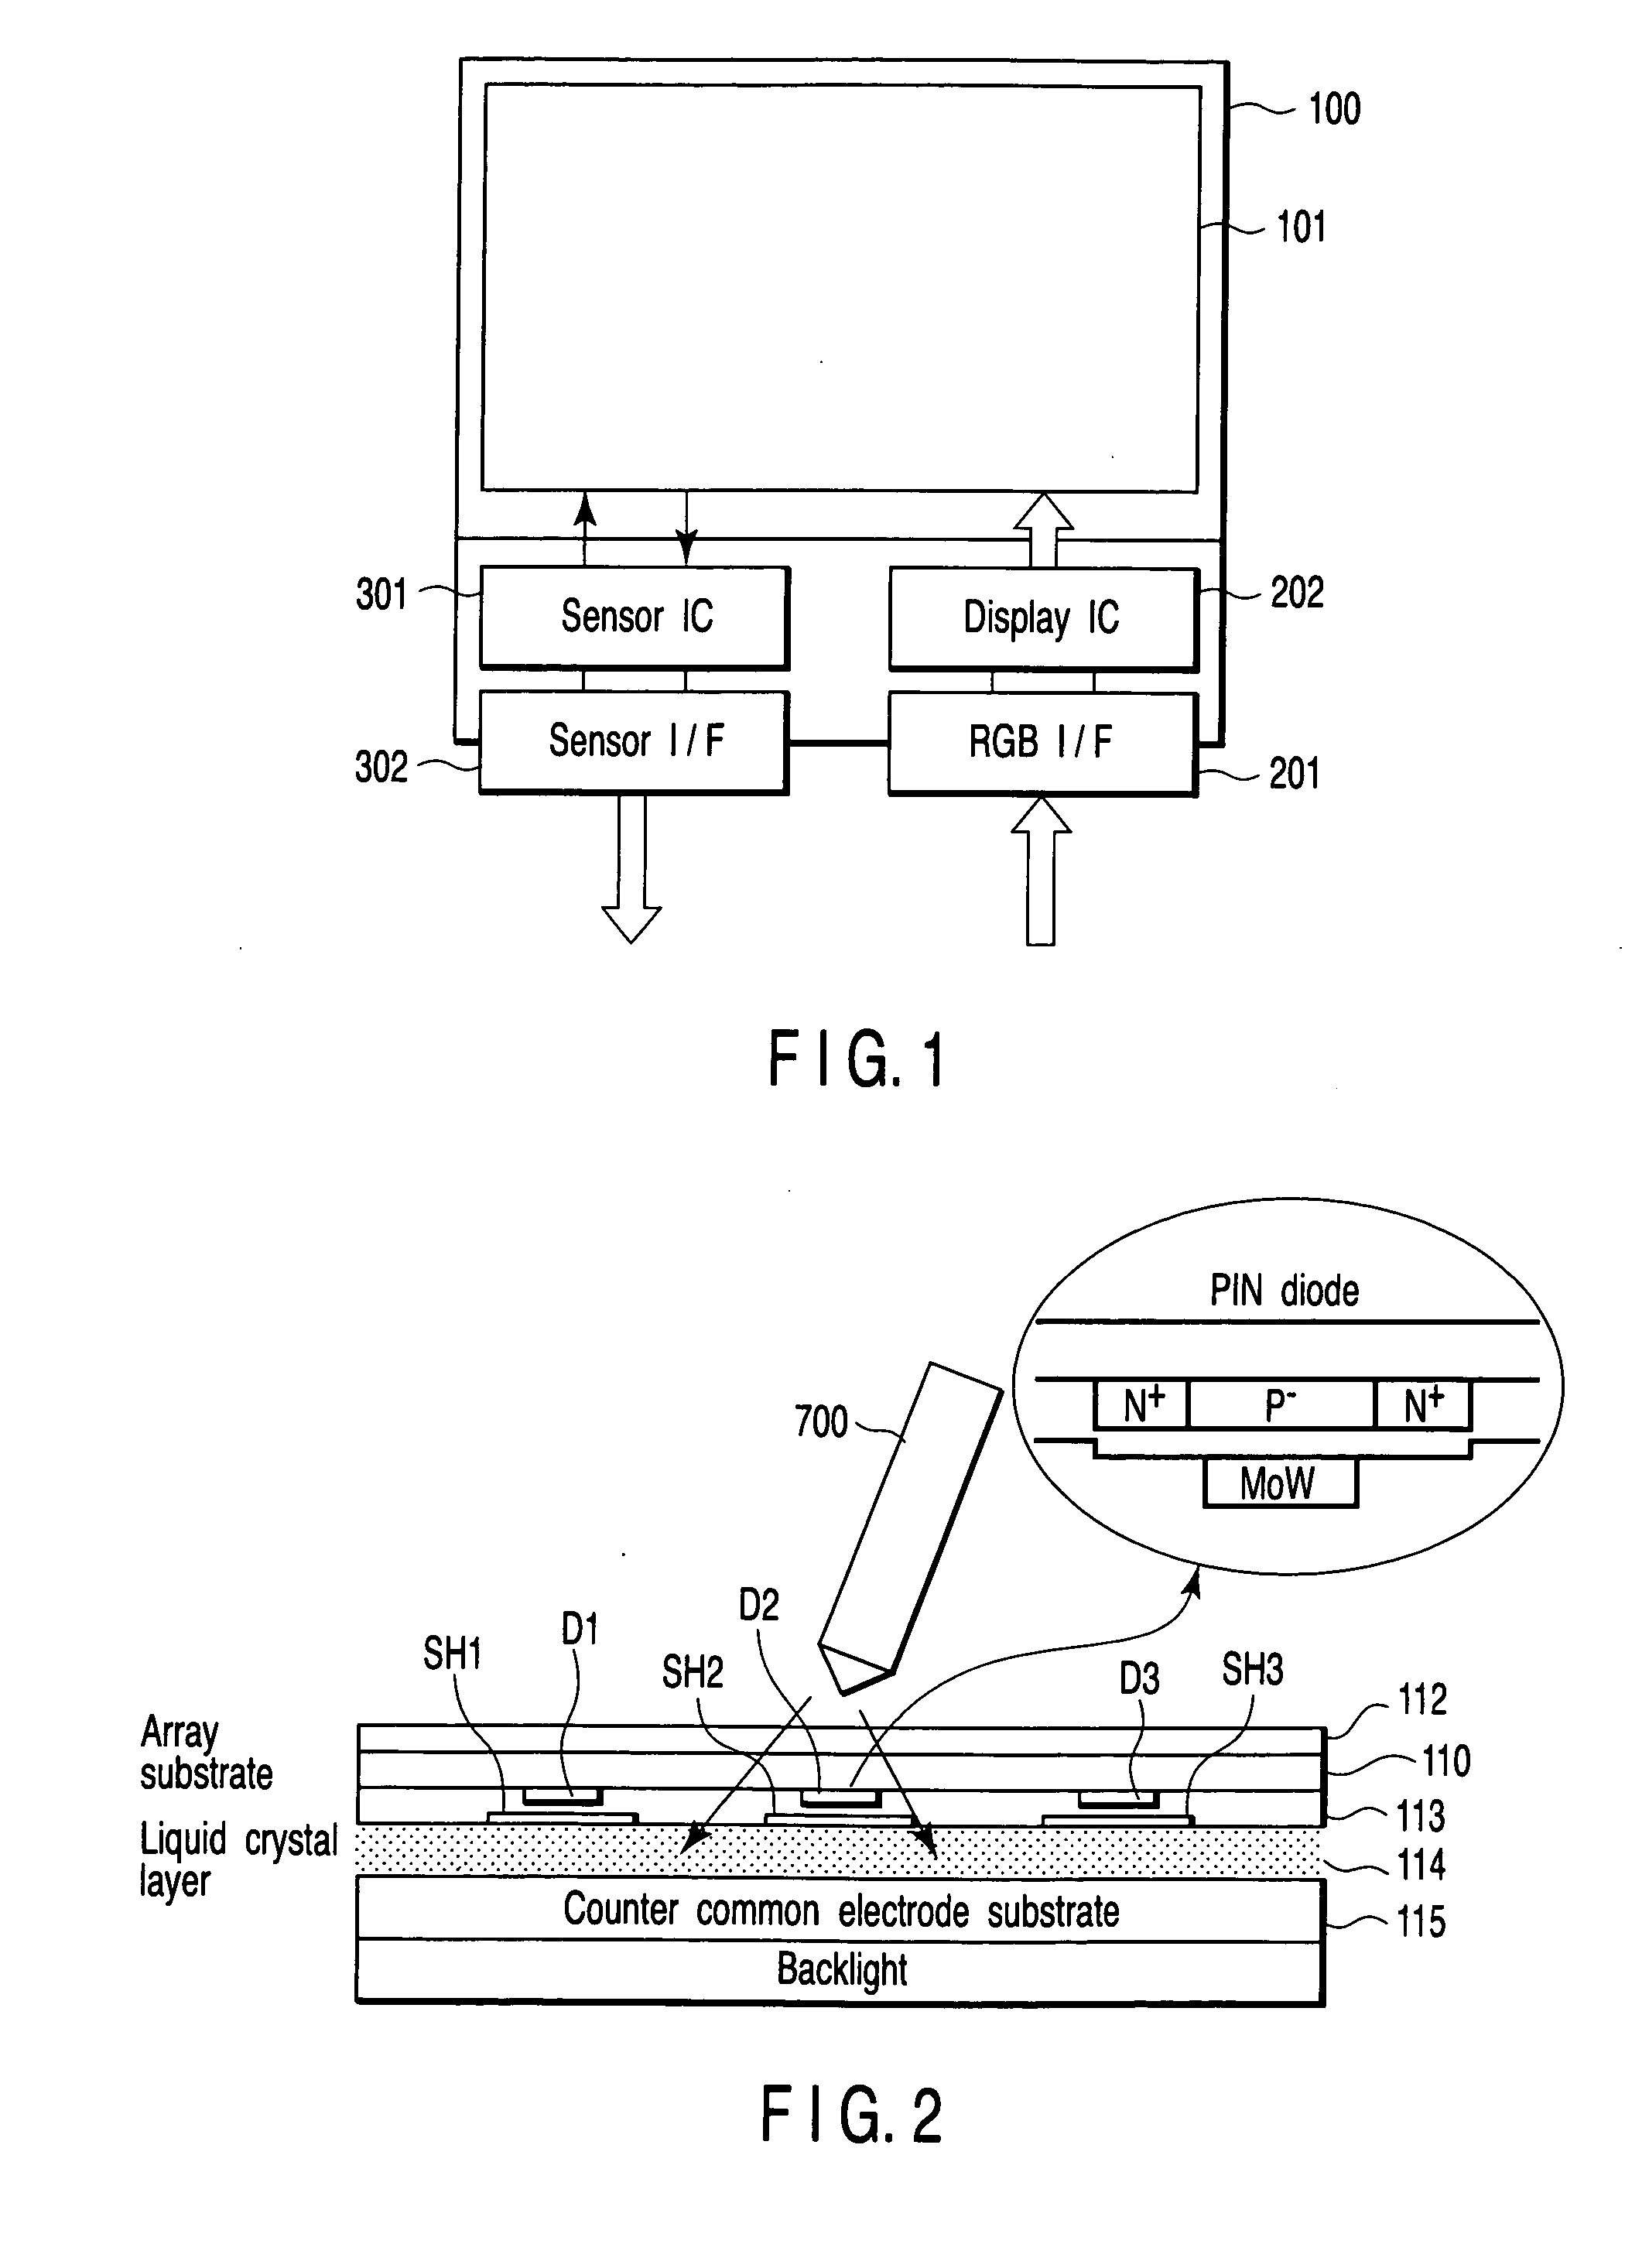 Display device with built-in sensor